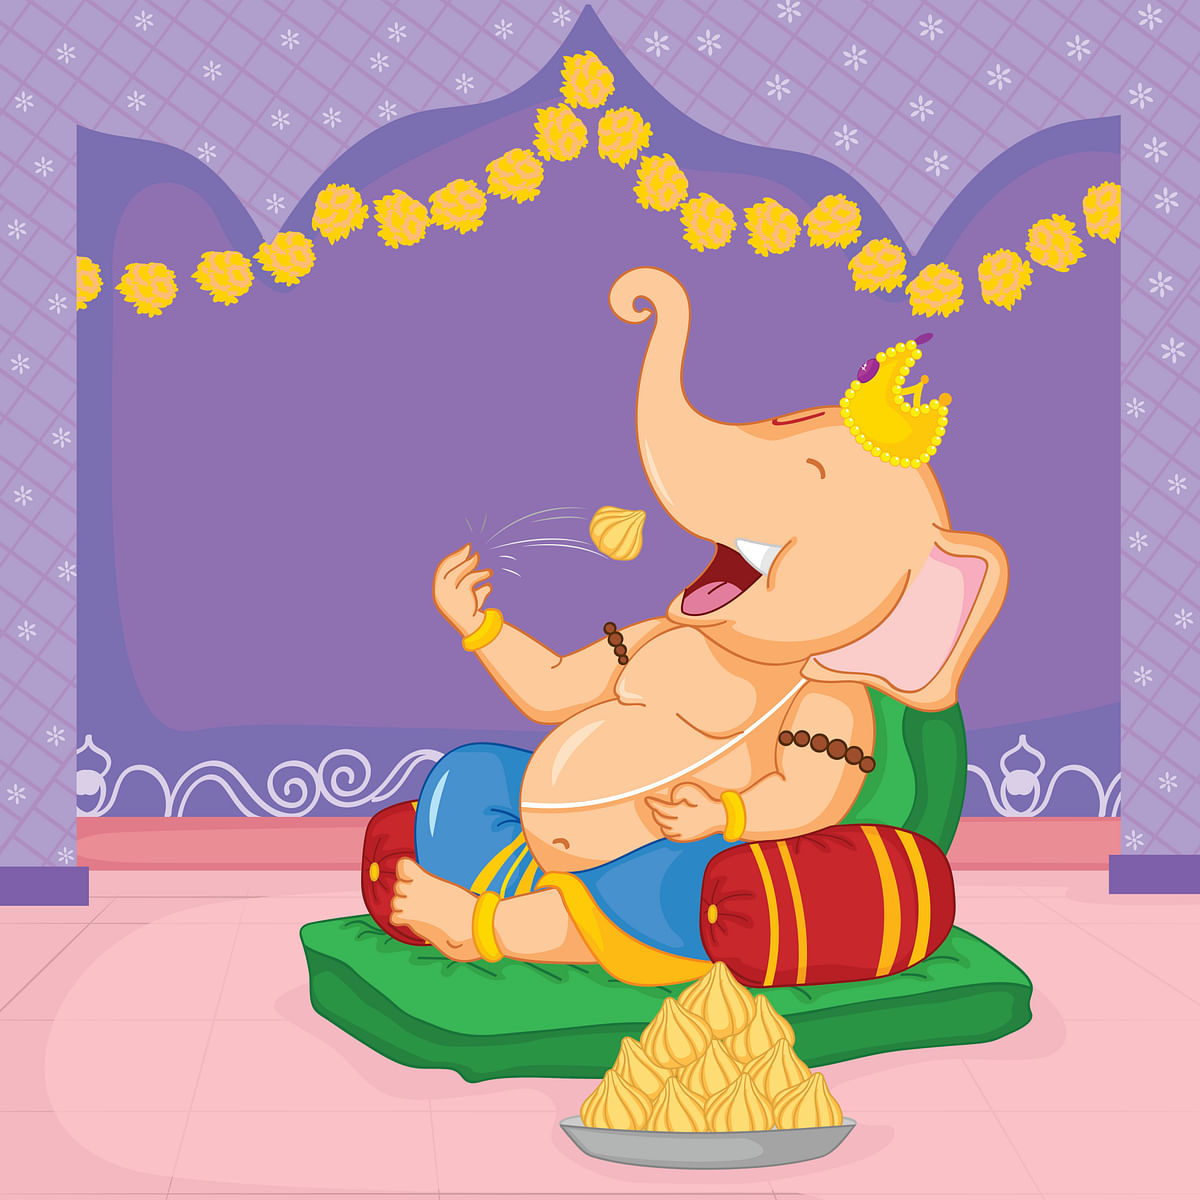 Lord Ganesha is offered Modaks as bhog during the puja.